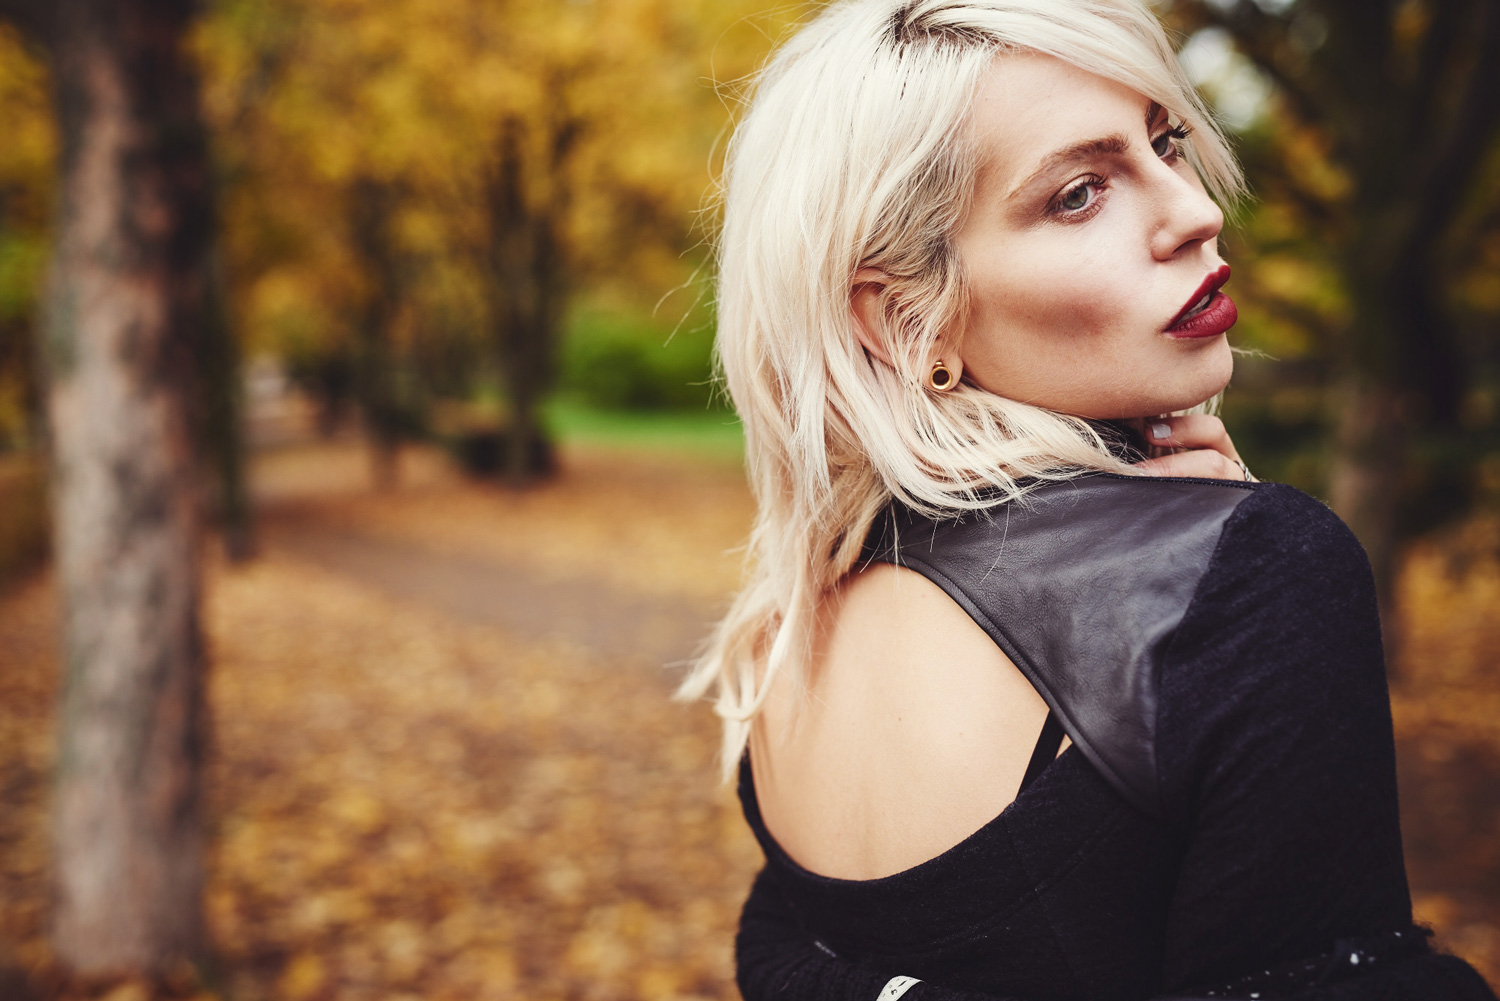 view all the details on my blog | fall/autumn outfit | comfy & black style | via Masha Sedgwick, fashion blogger from Berlin